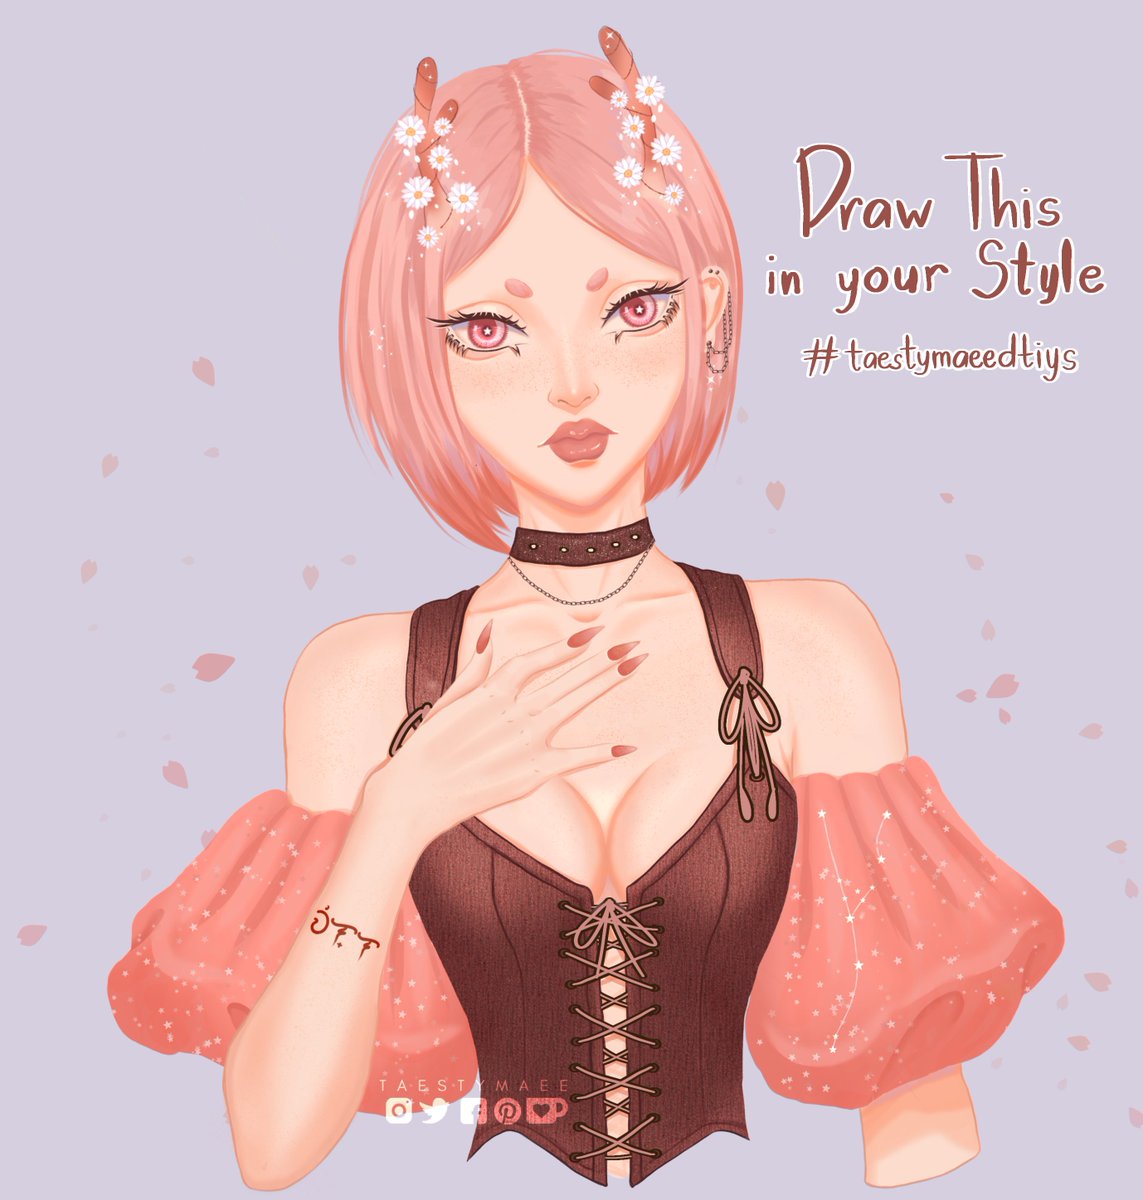 ✨WELCOME TO MY DTIYS ✨
Thank you guys for 1.5k🎉 and as I promised here's a #dtiys to celebrate!!

(More info and rules are on this thread!)

#artph #taestymaeedtiys #taestymaee1k #ArtistOnTwitter #ArtistofSEA #dtiyschallenge